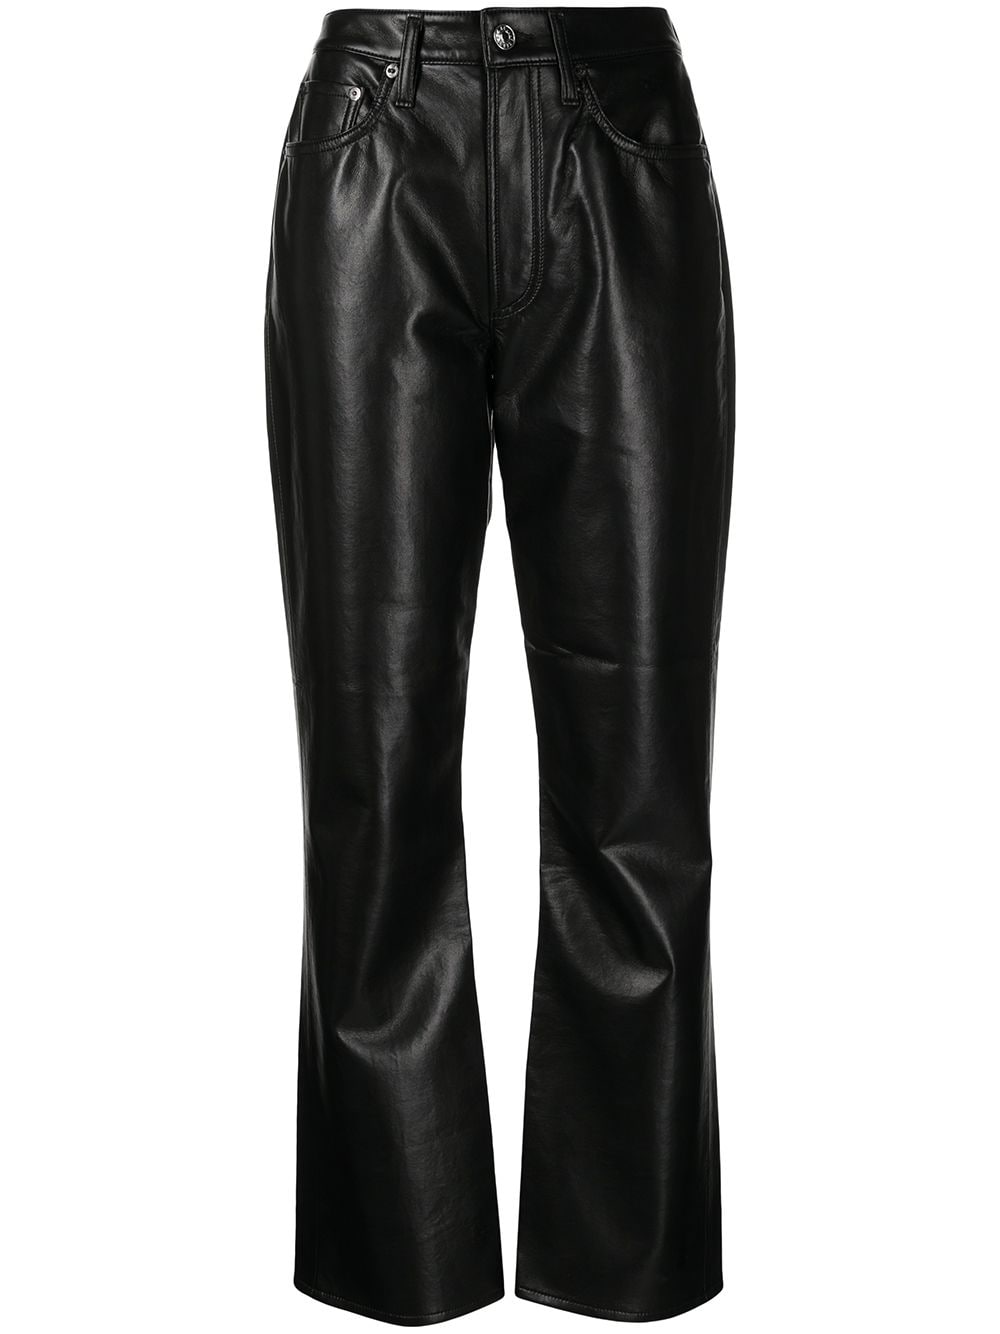 AGOLDE high-waisted flared trousers - Black von AGOLDE